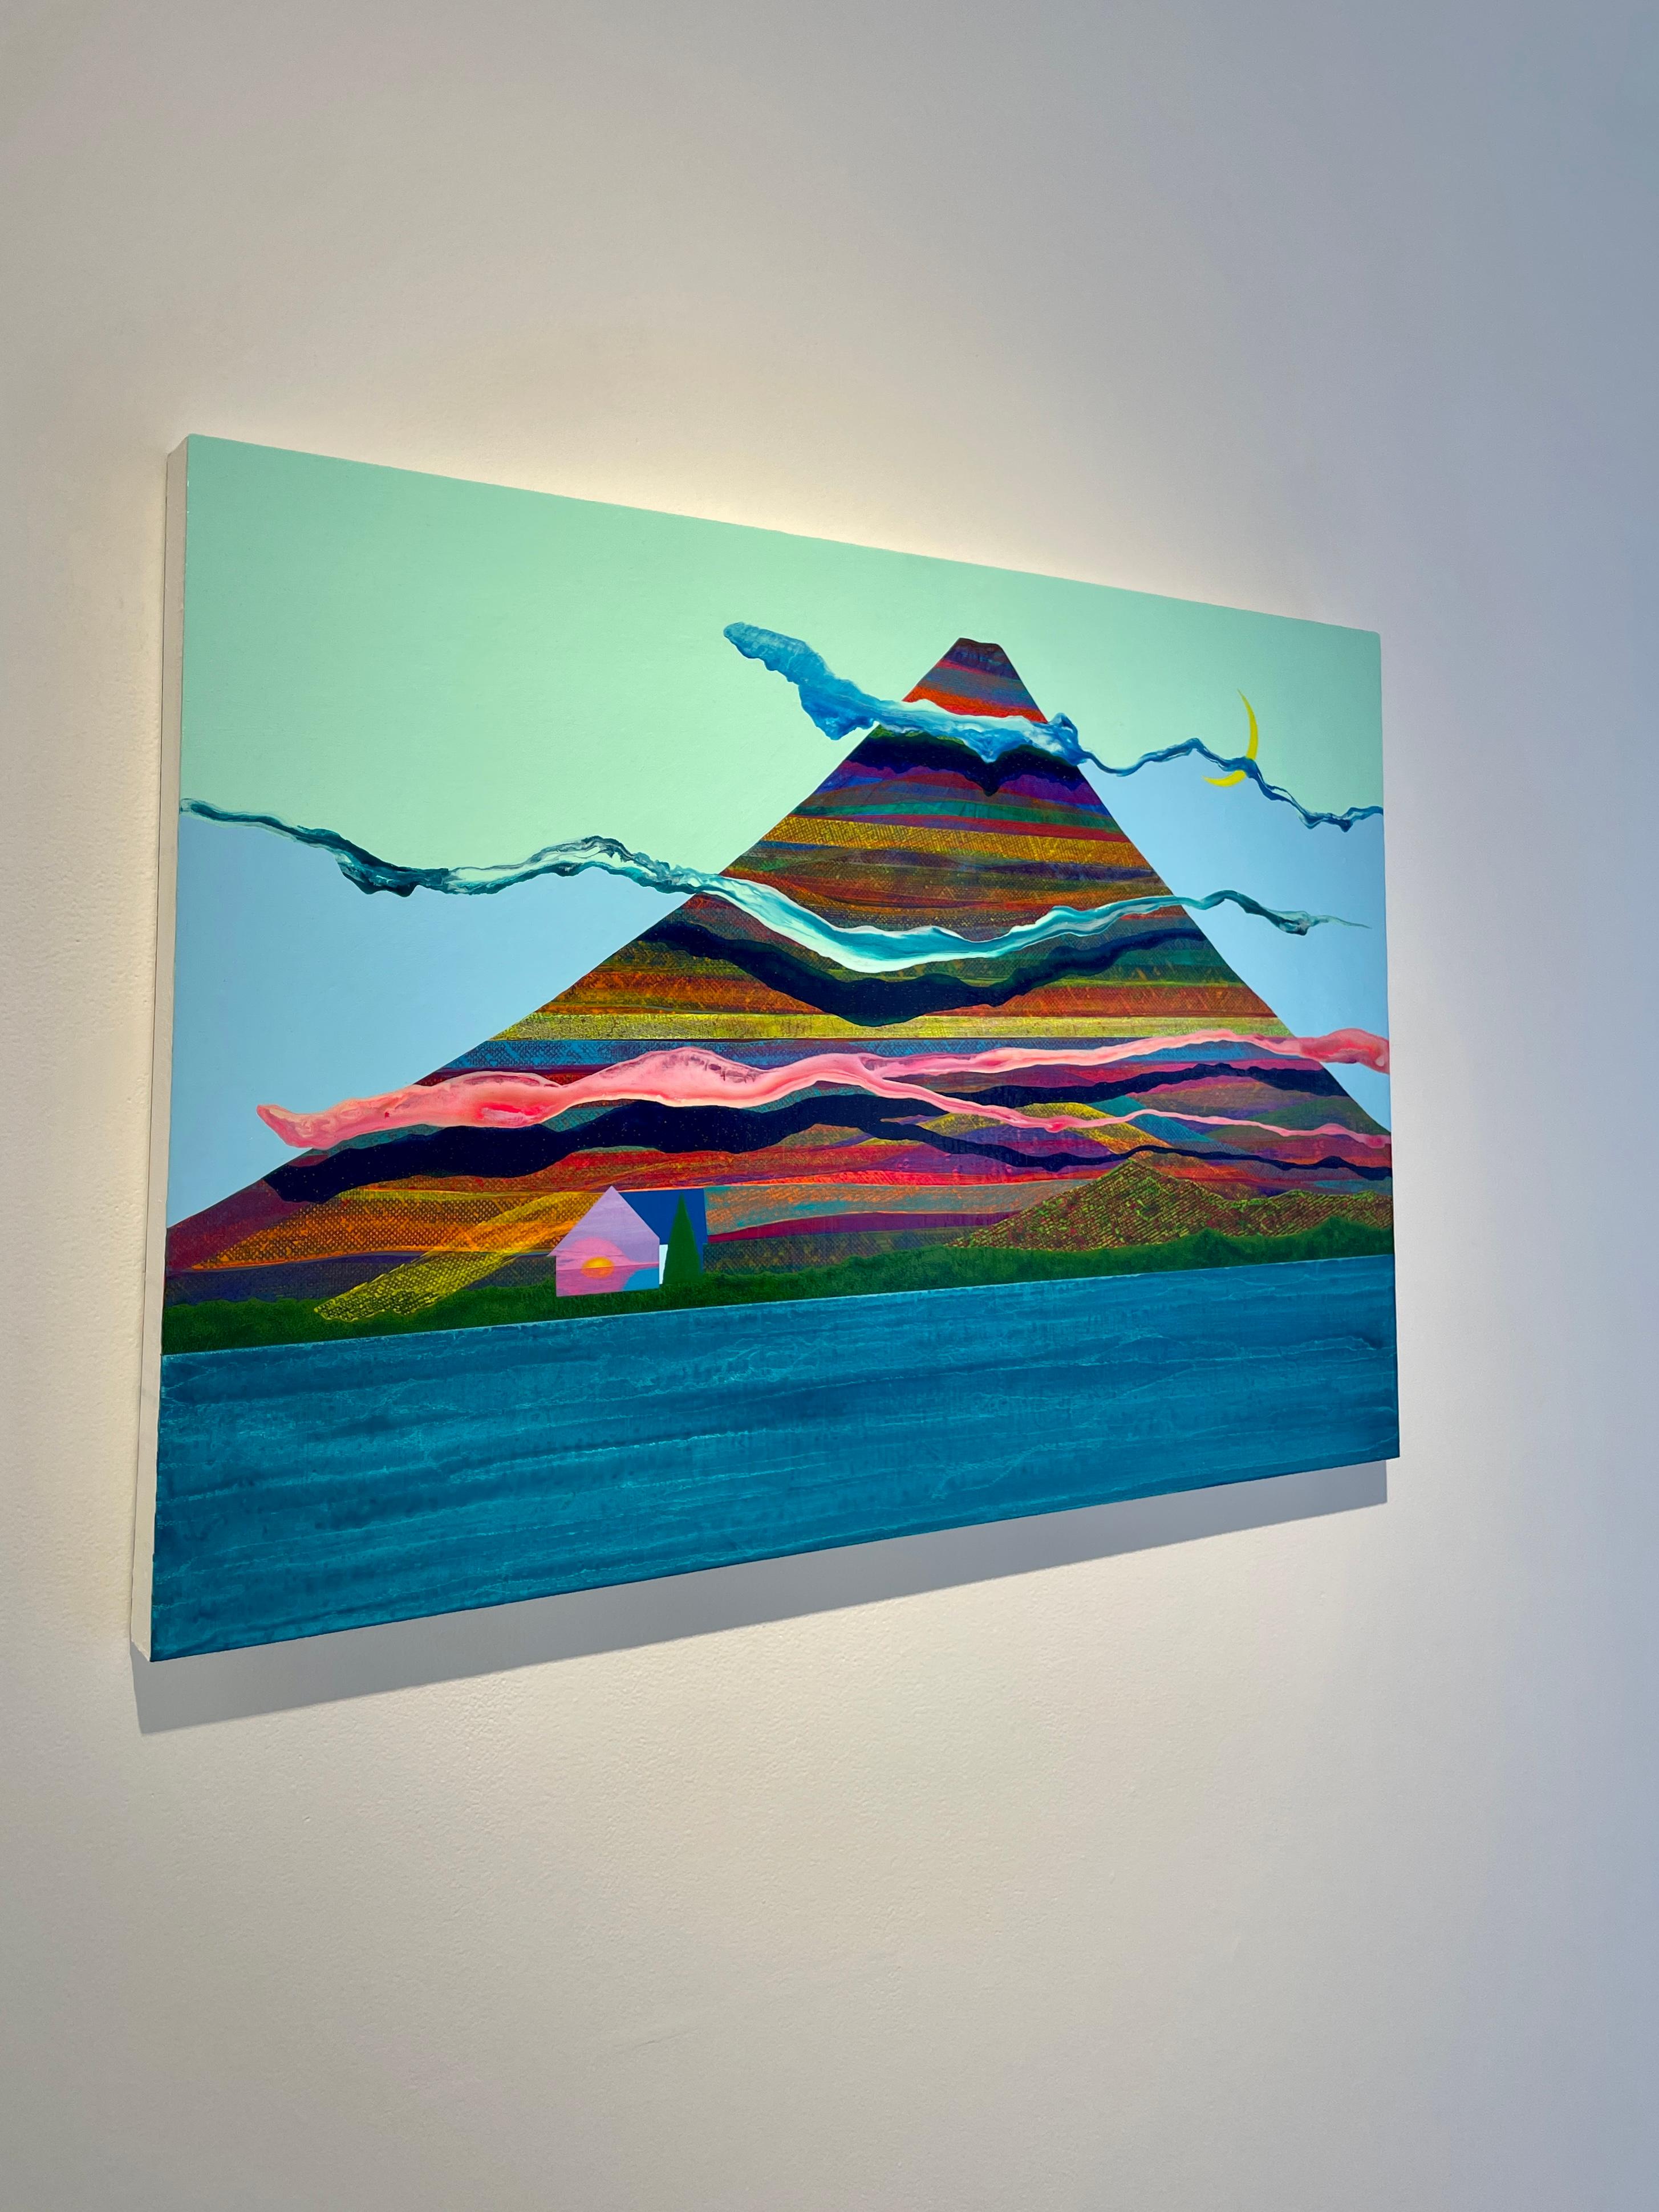 Empyrean, bright surrealistic painting of house against mountain, neon colors - Painting by James Isherwood